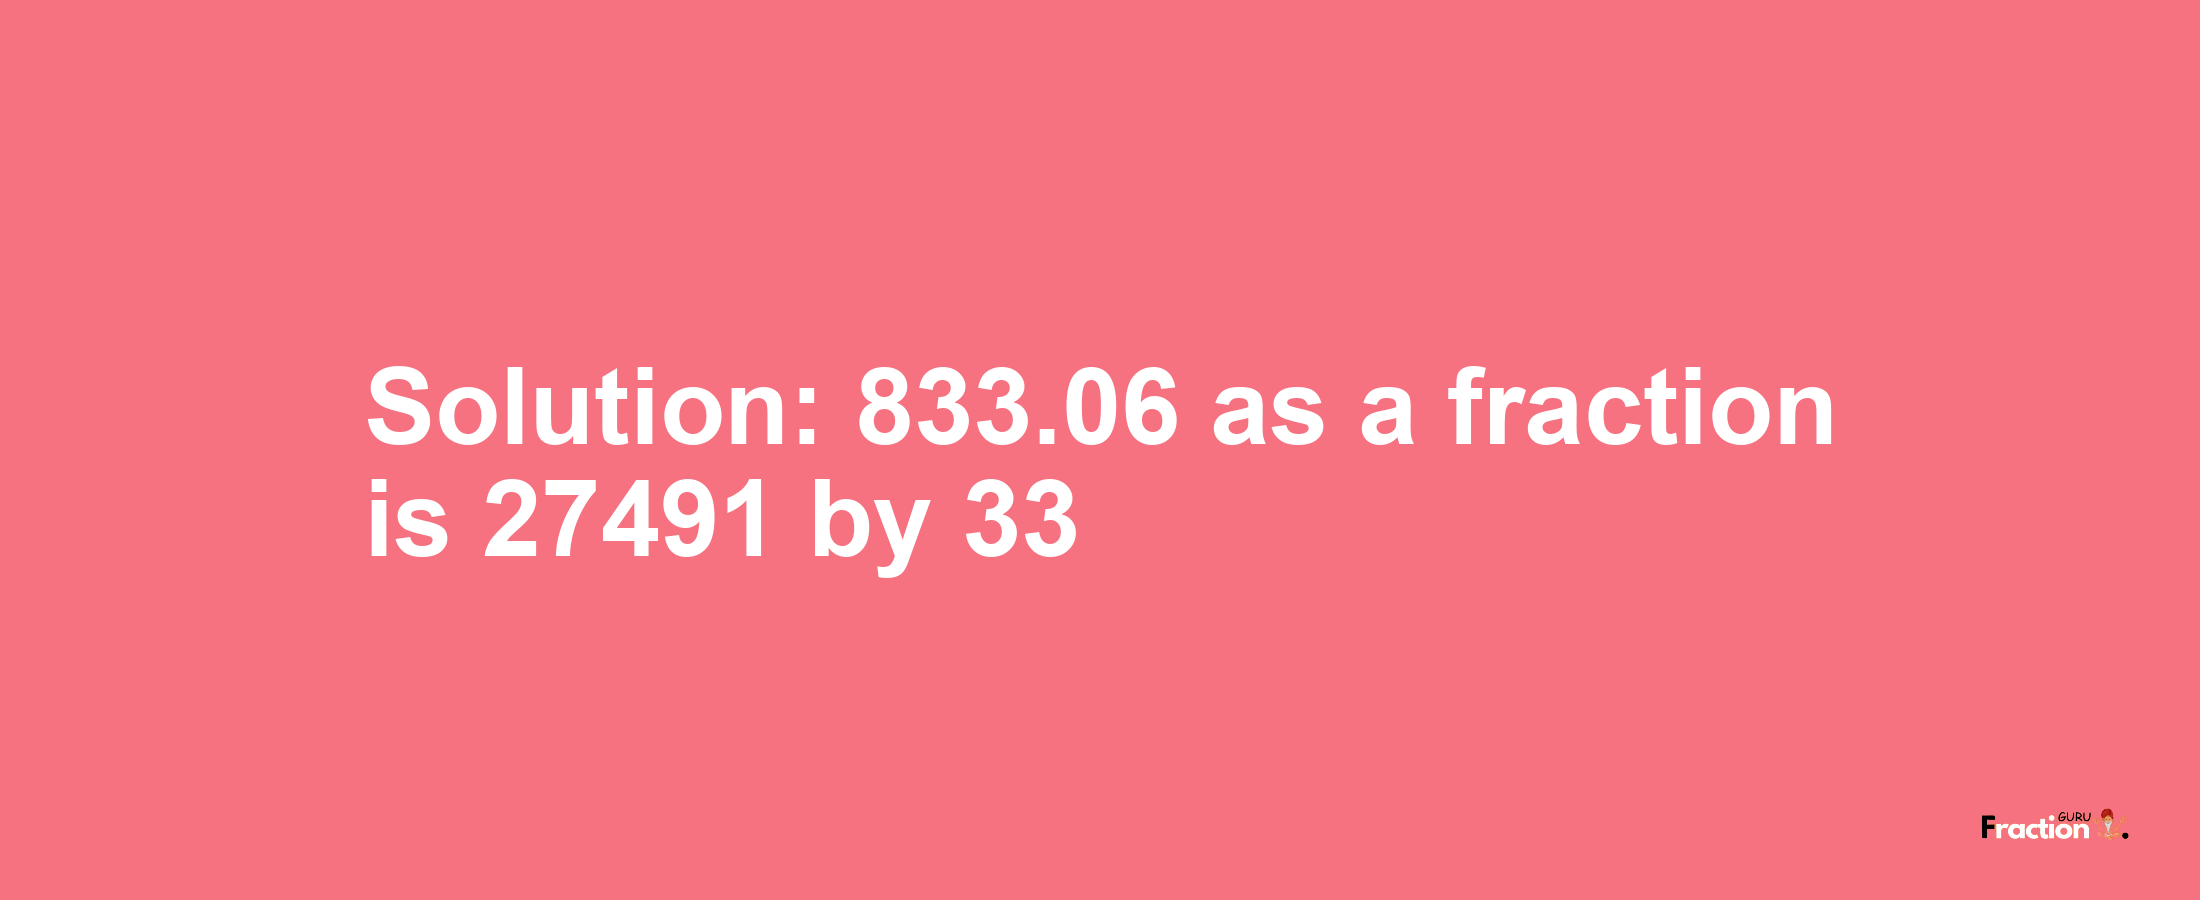 Solution:833.06 as a fraction is 27491/33